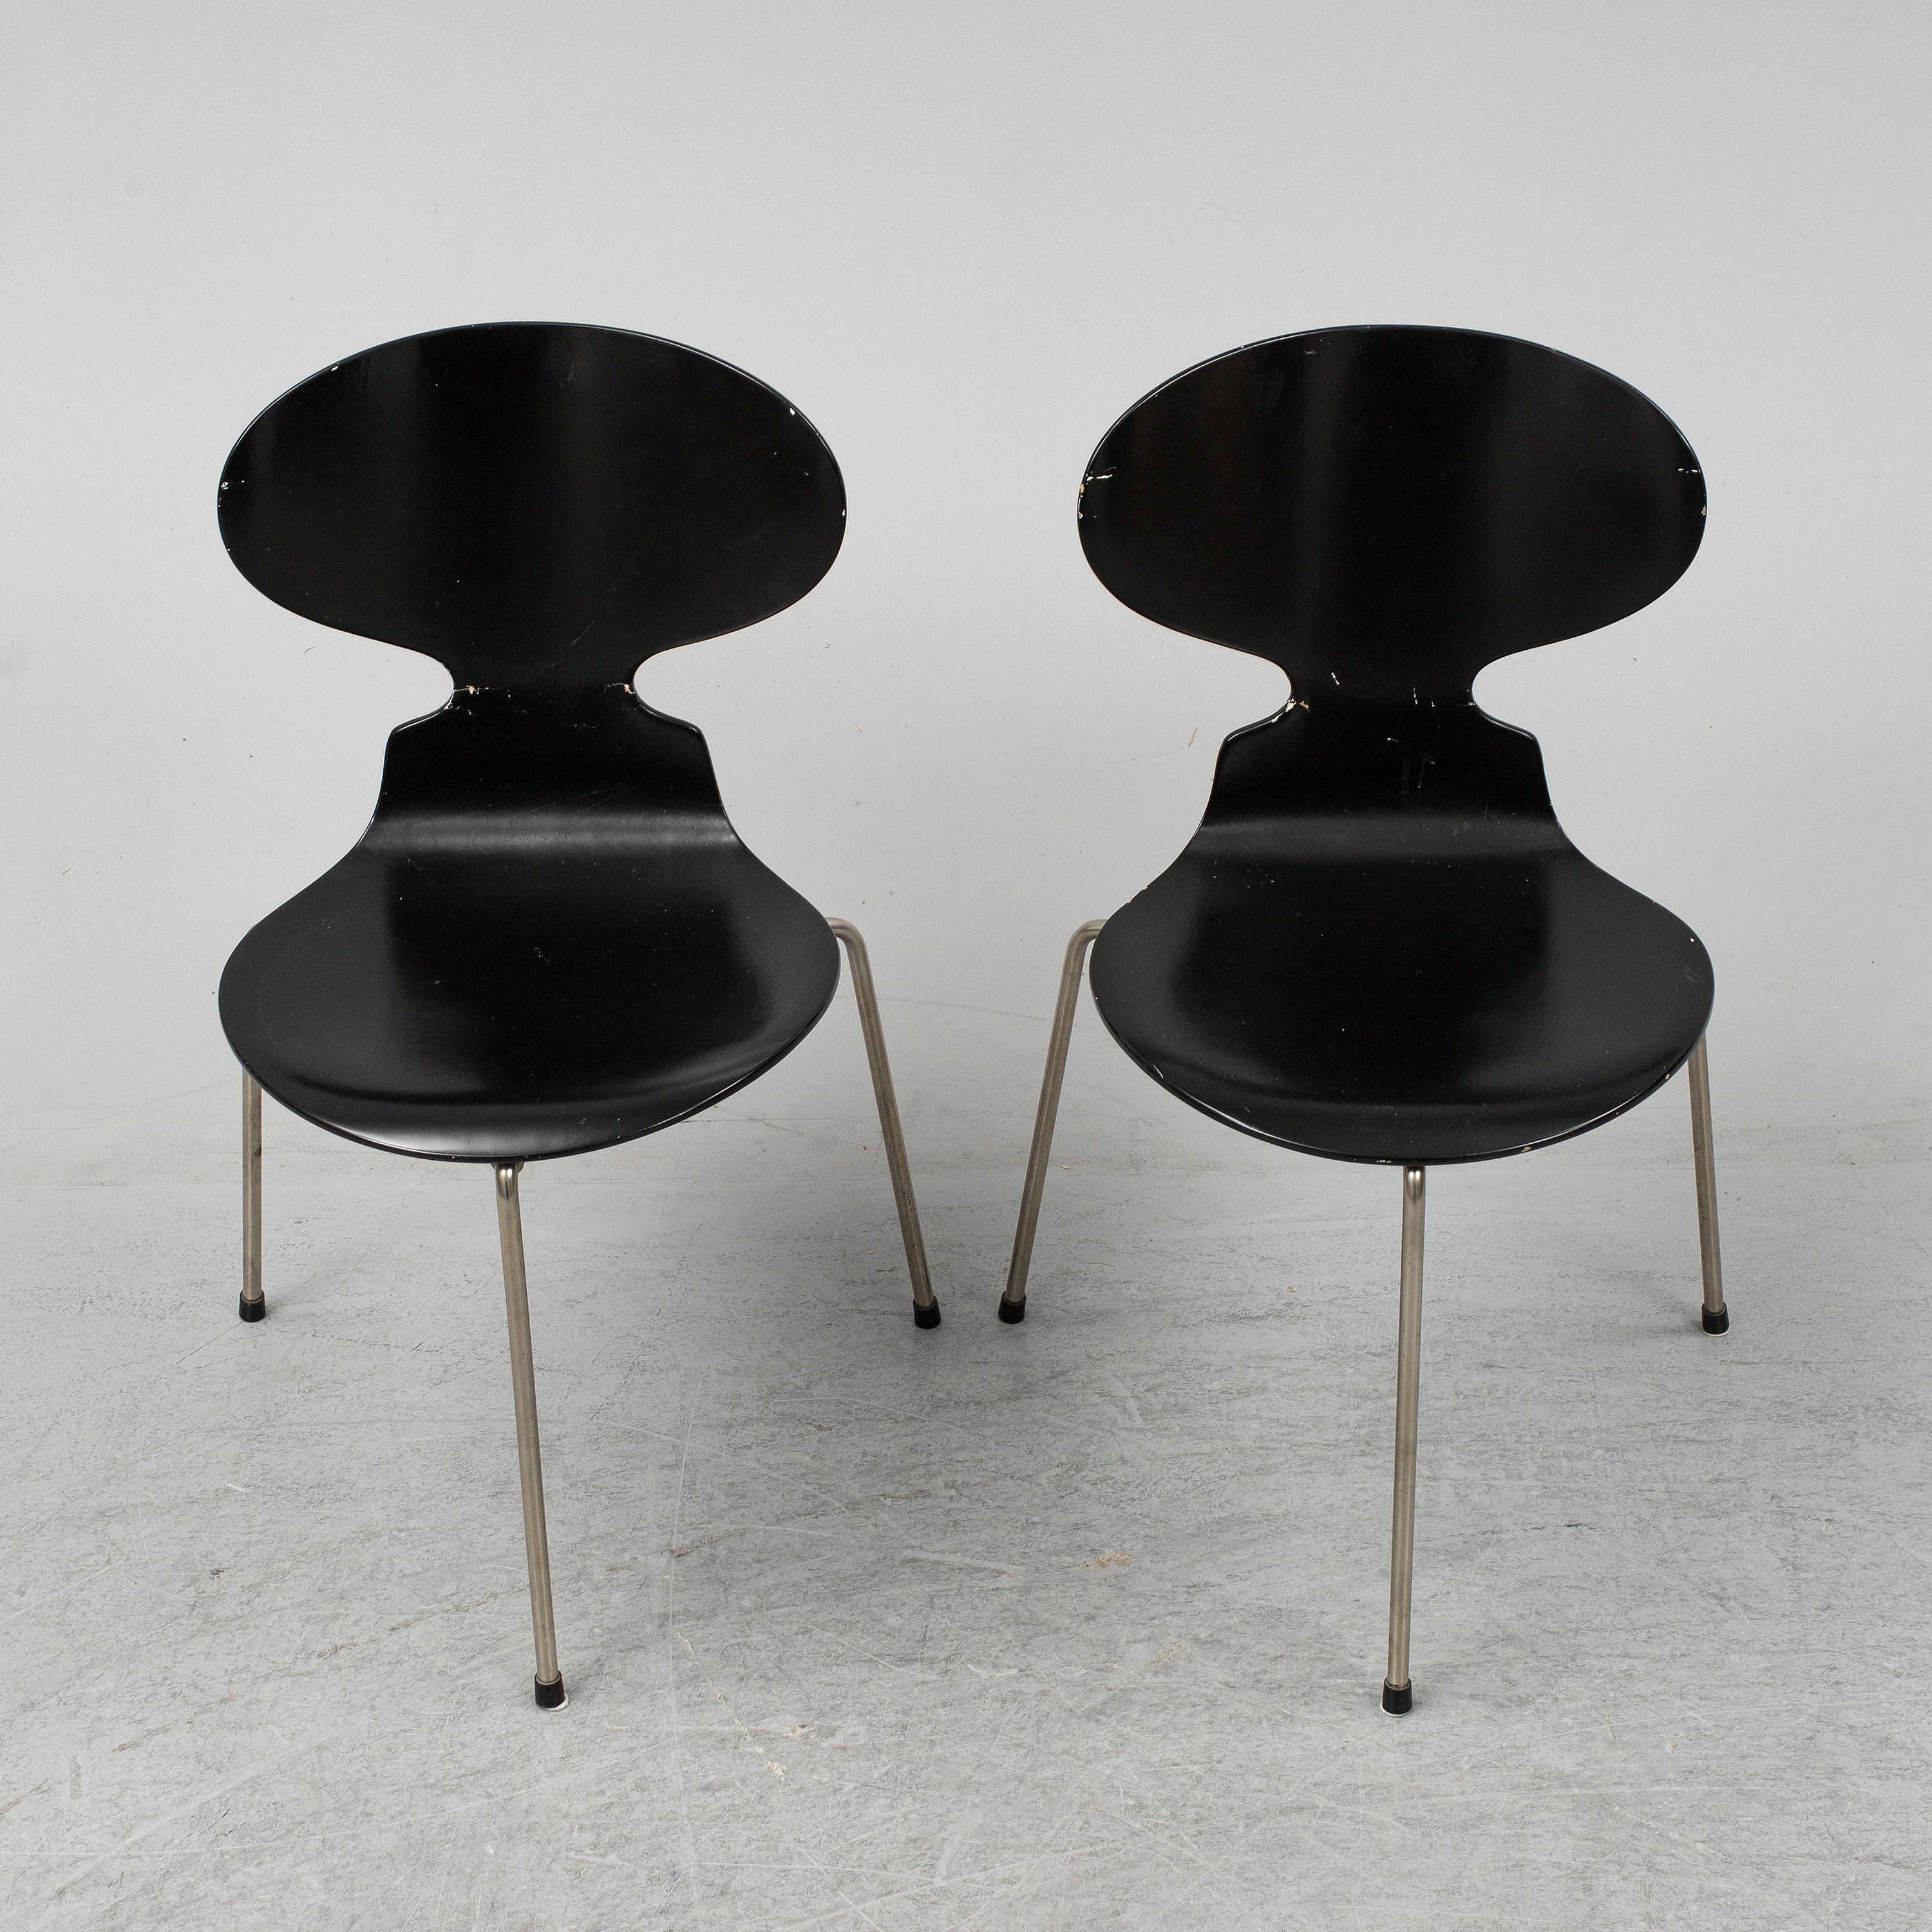 20th Century Arne Jacobsen Ant Chairs, Original Set from Early Production, 1952 For Sale